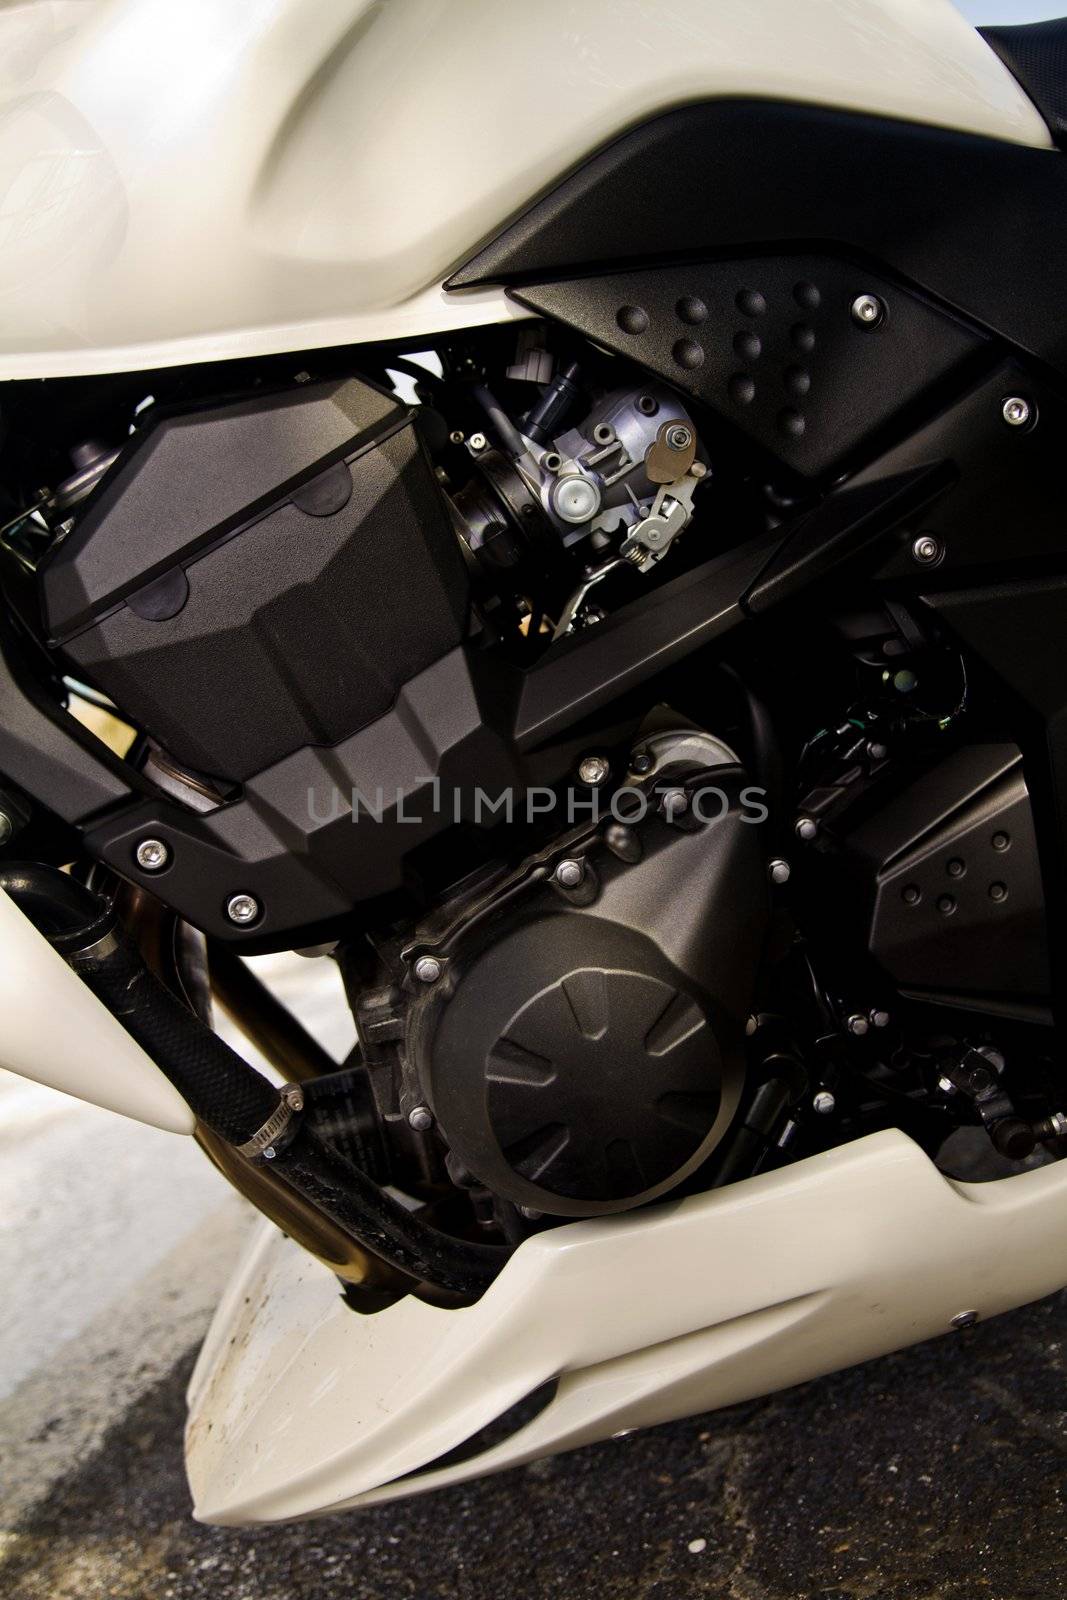 View of a high speed motorcycle detail of the engine.